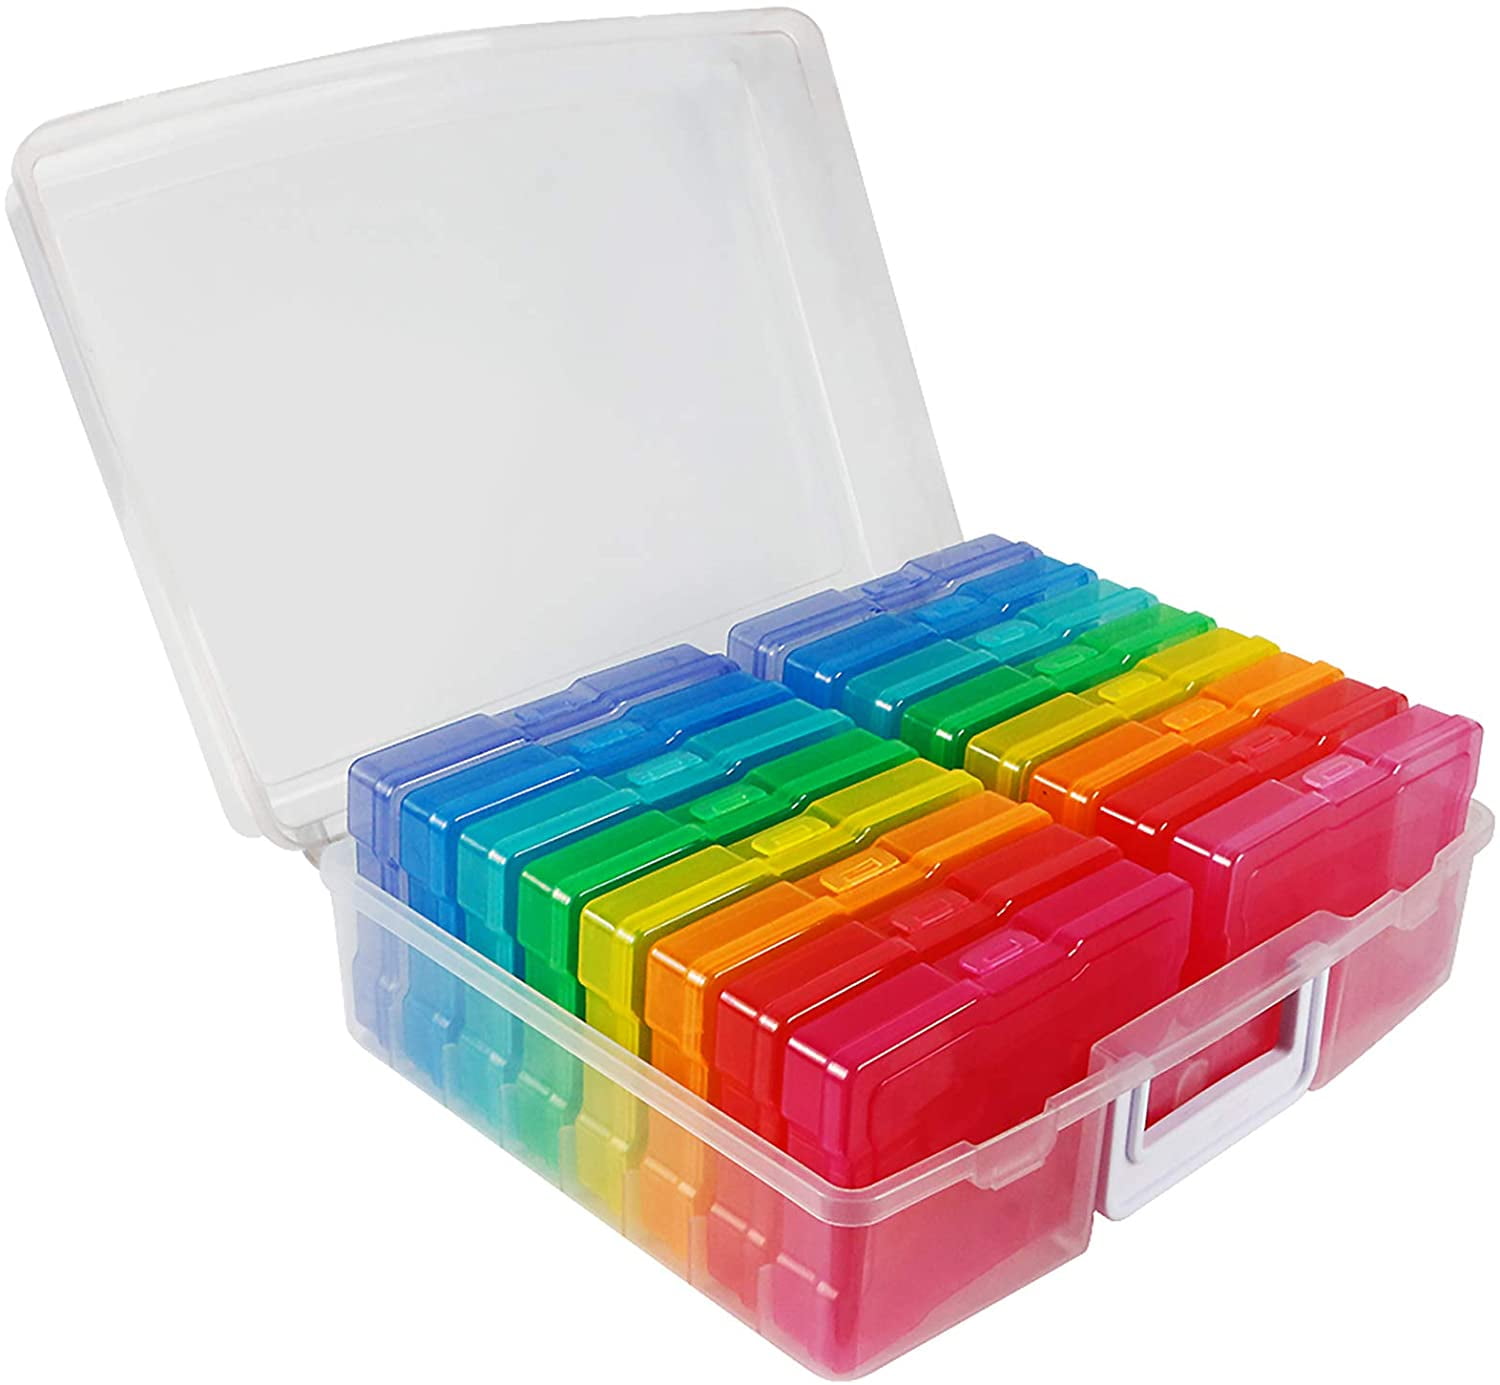 Details about   STORAGE BOX Organize 14"x10" Crafts Art Paper Photo Snap Tight Clear Plastic 